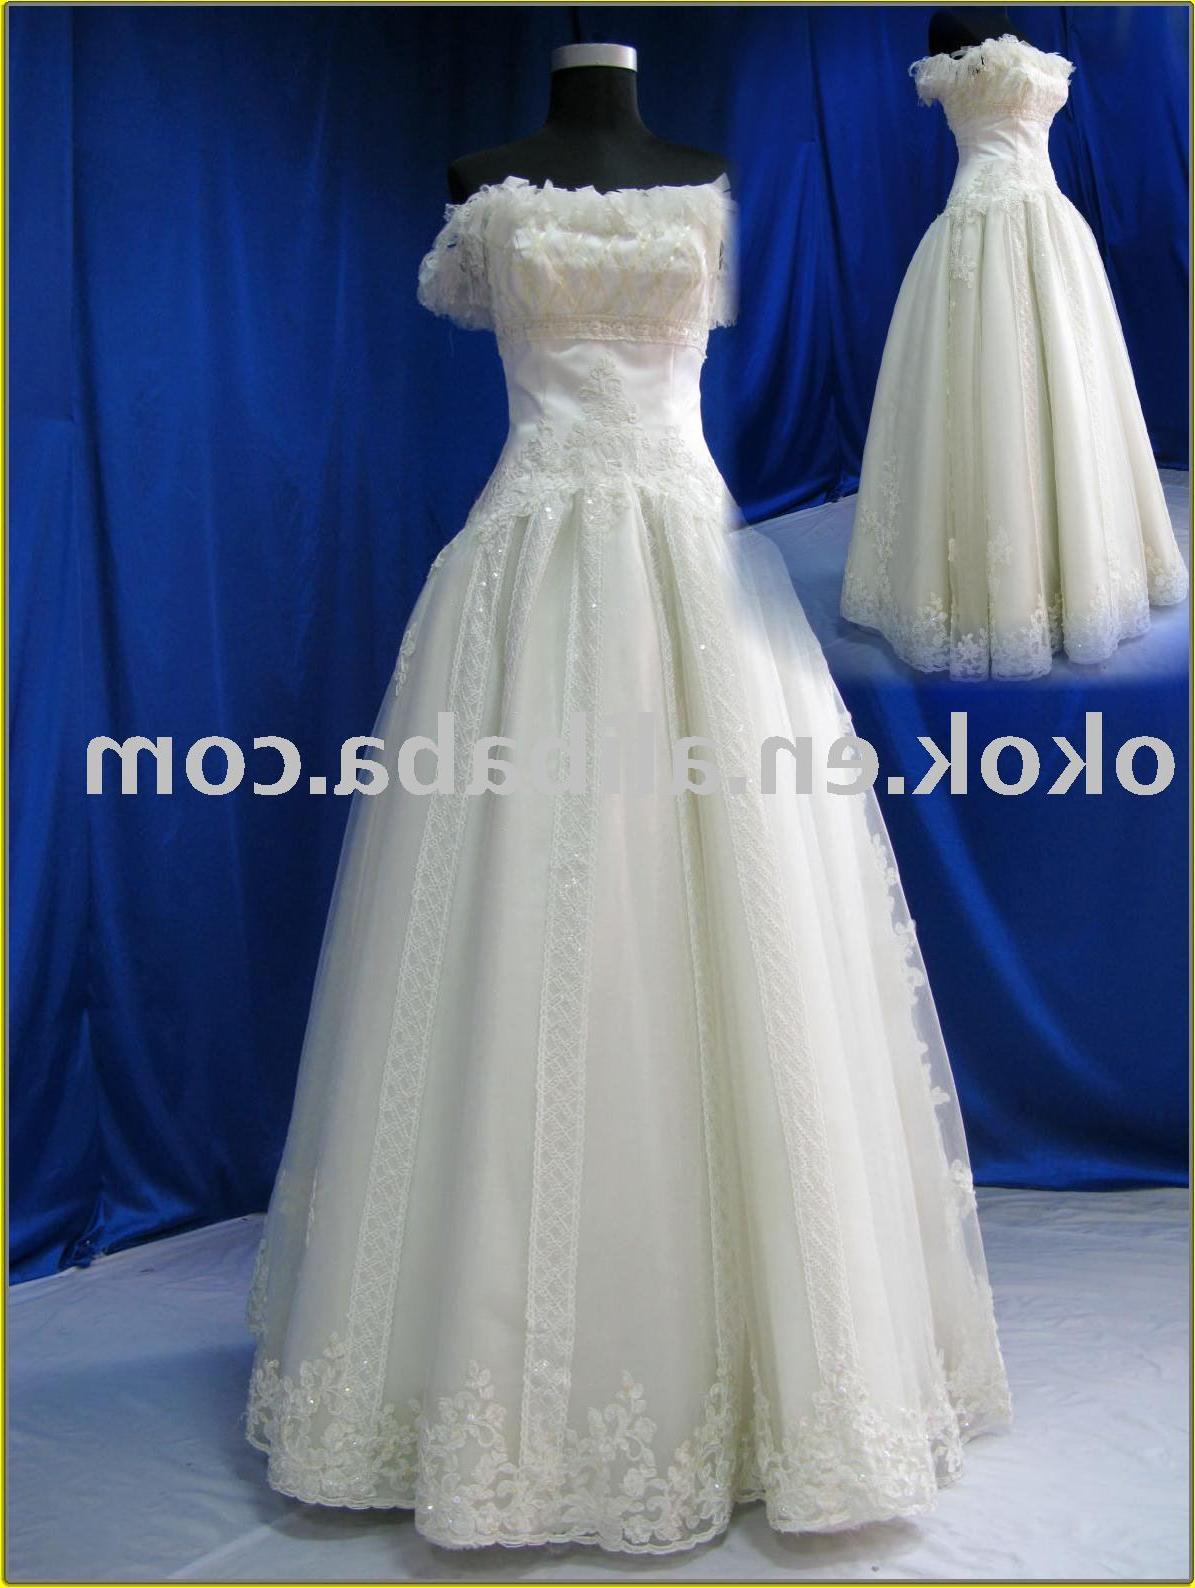 See larger image: VA037 cap sleeve Couture wedding dress